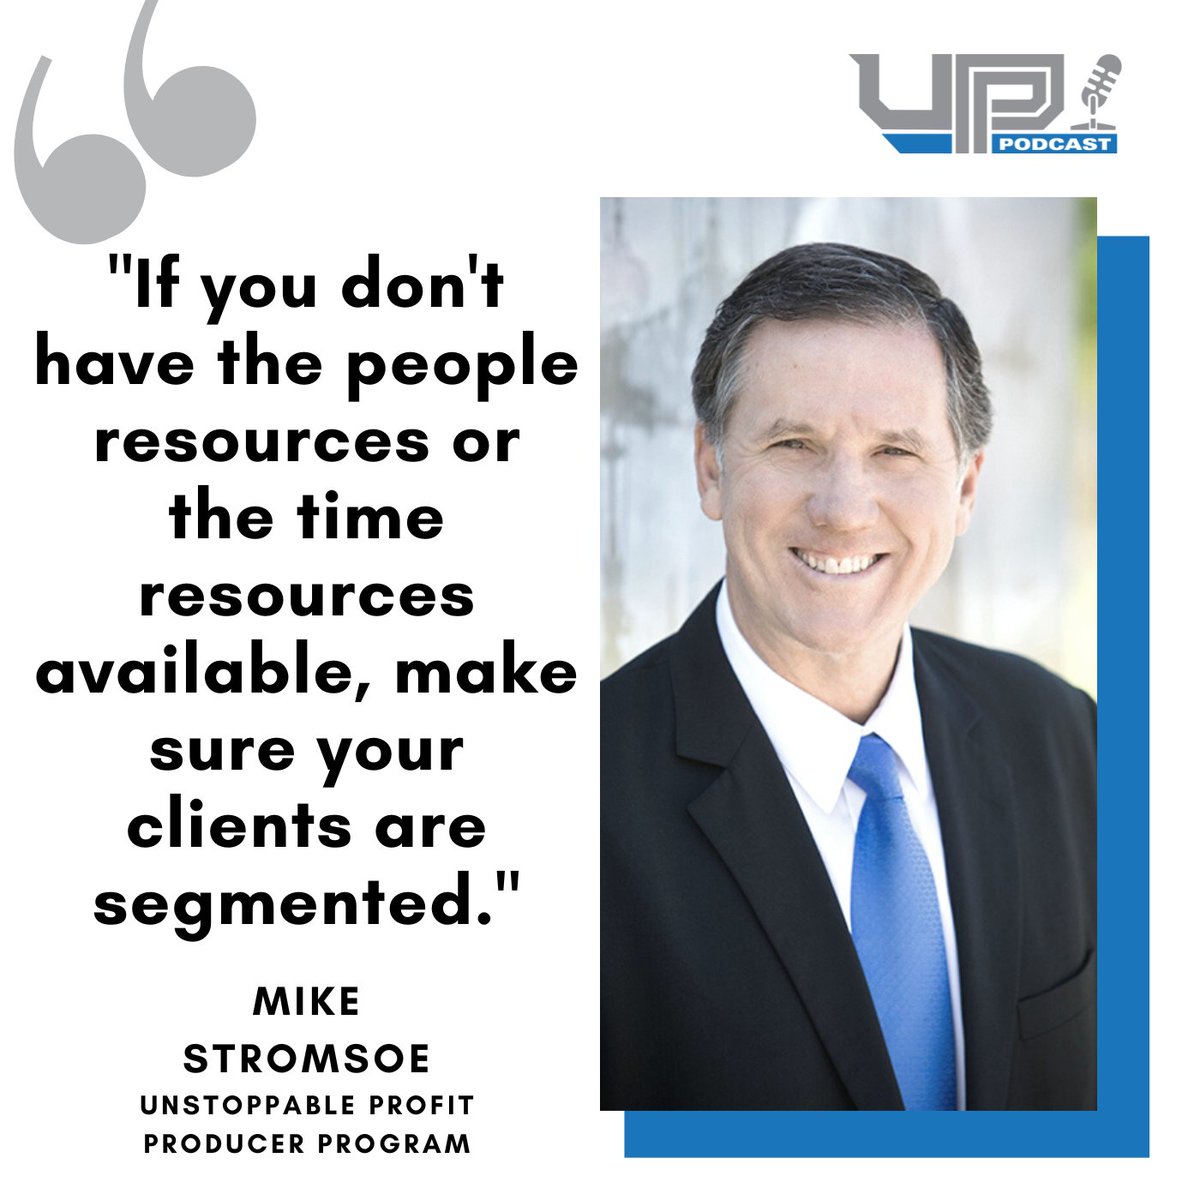 They help identify when a team member may be in the wrong position, allowing for adjustments for improved performance.

Listen: bit.ly/UPPE247
Watch: bit.ly/UPPYT247

#UPPLife #Coaching #Insurance #JobDescriptions #Hiring #Skills #Abilities #Engagement #Employee